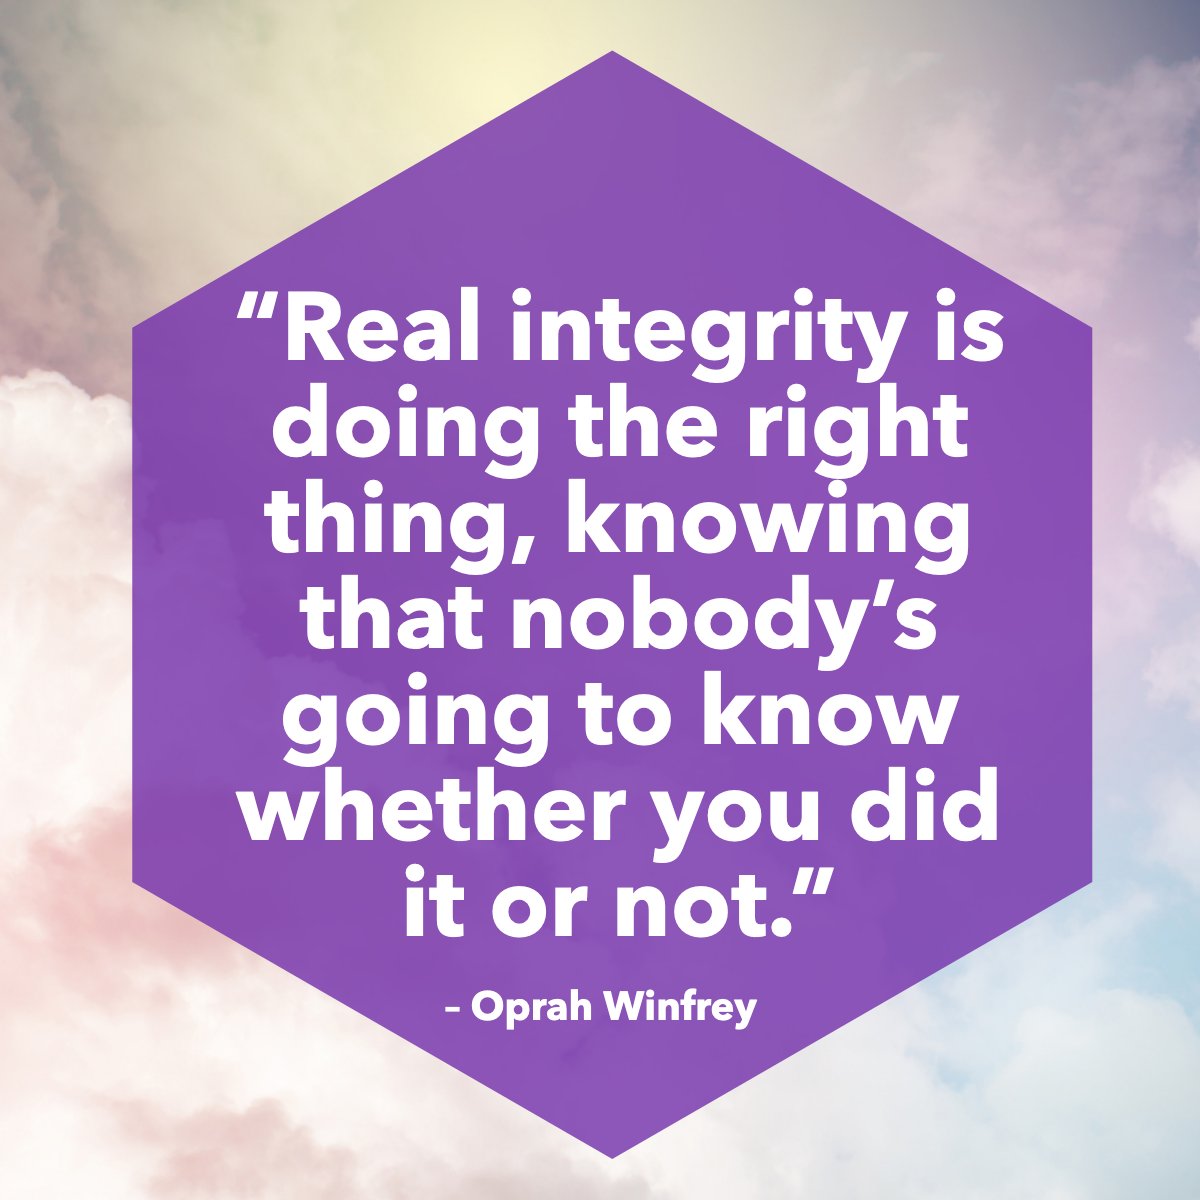 Integrity is a choice we make, and it's a choice we must keep making, every moment of our lives. 🙌✨

#teamintegrity    #integritylife    #kindness    #change
#realestate #franciskrebsrealtor #googlefranciskrebs #buyhomes #sellhomes #newconstruction